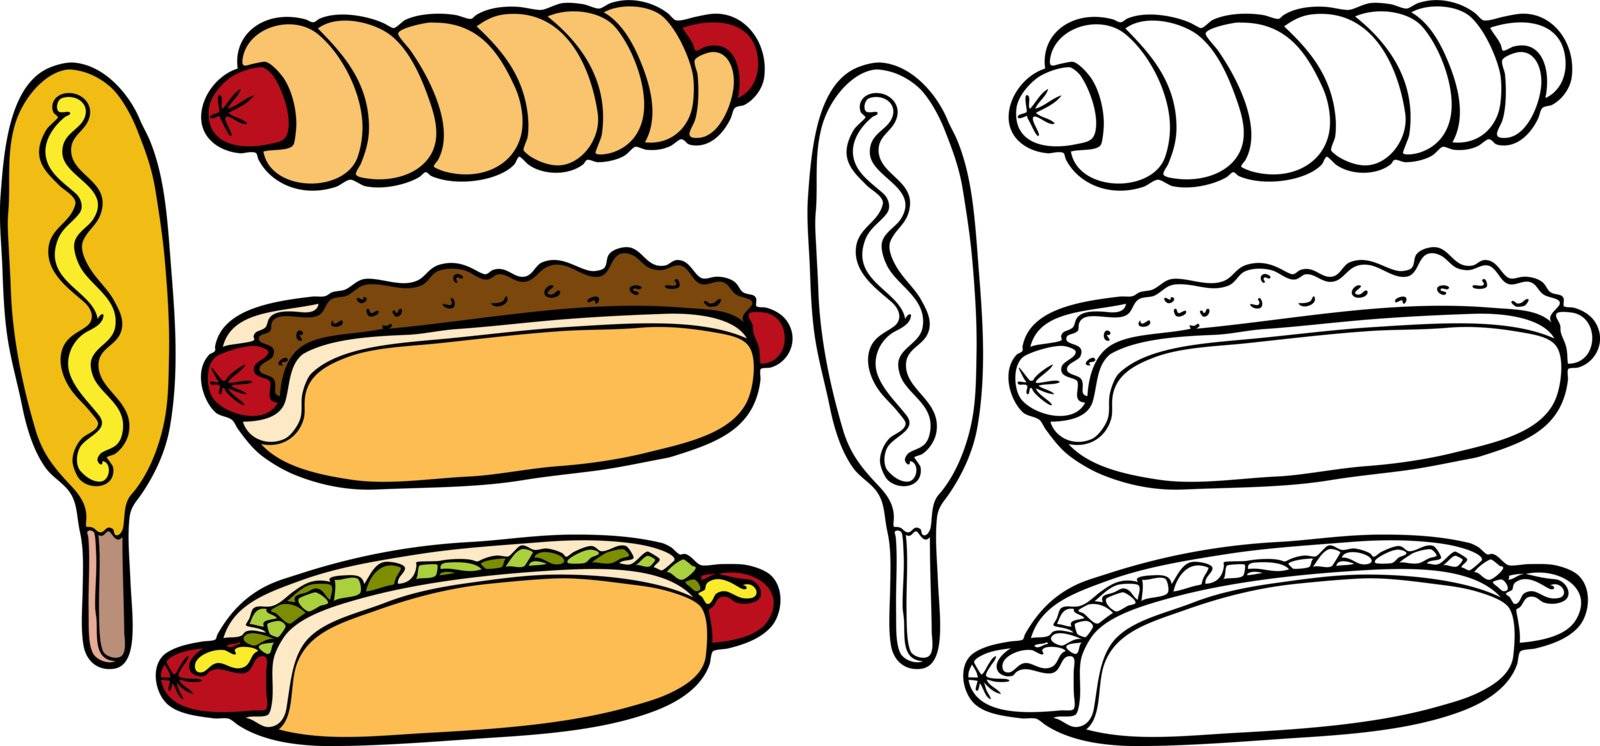 Cartoon image of a variety of different types of hot dogs - both color and black / white versions.